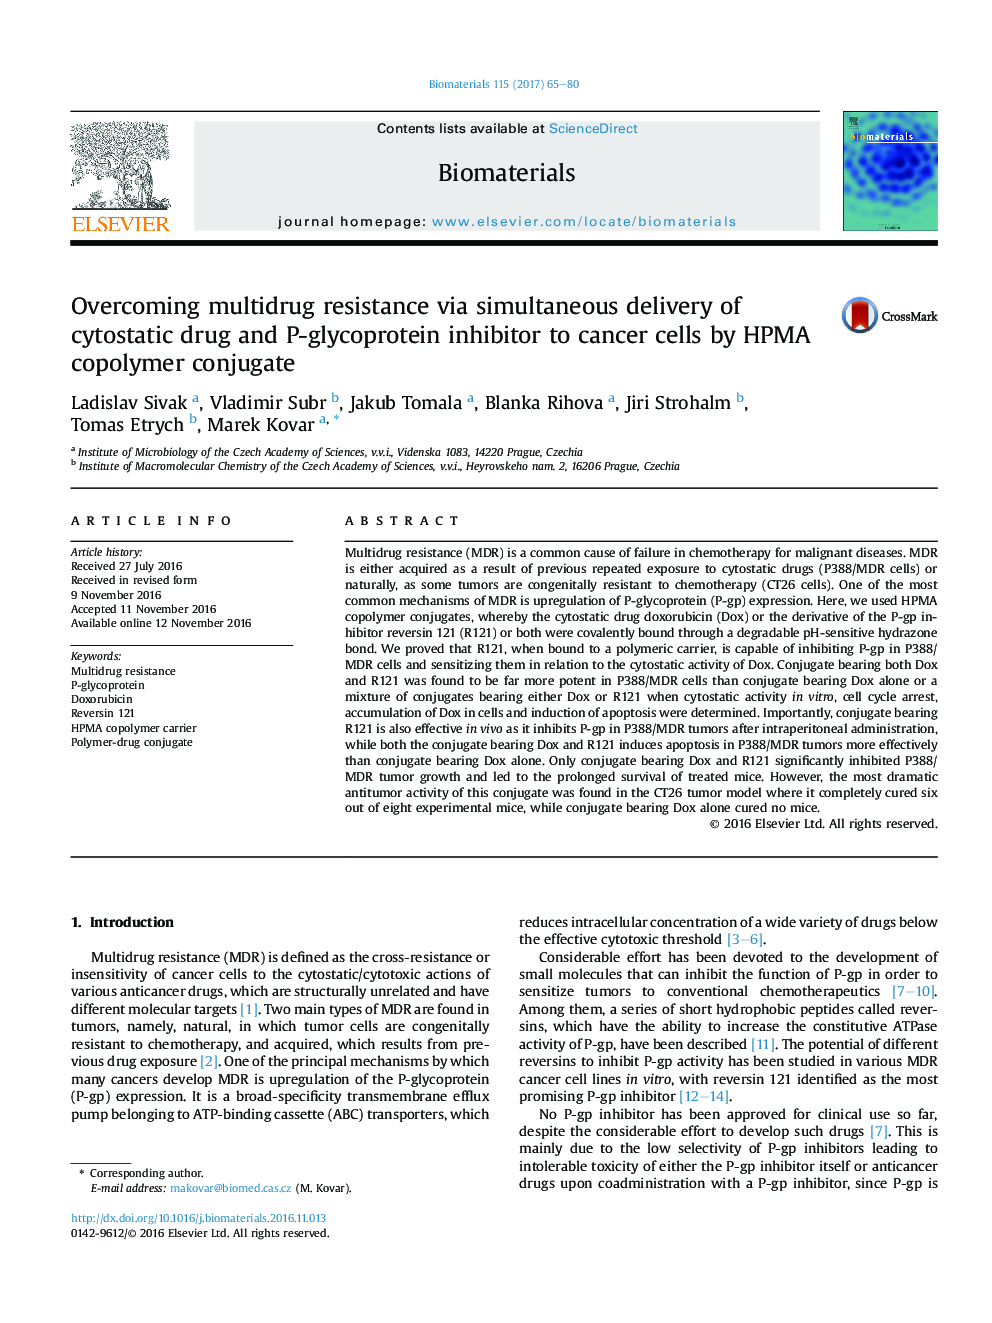 Overcoming multidrug resistance via simultaneous delivery of cytostatic drug and P-glycoprotein inhibitor to cancer cells by HPMA copolymer conjugate